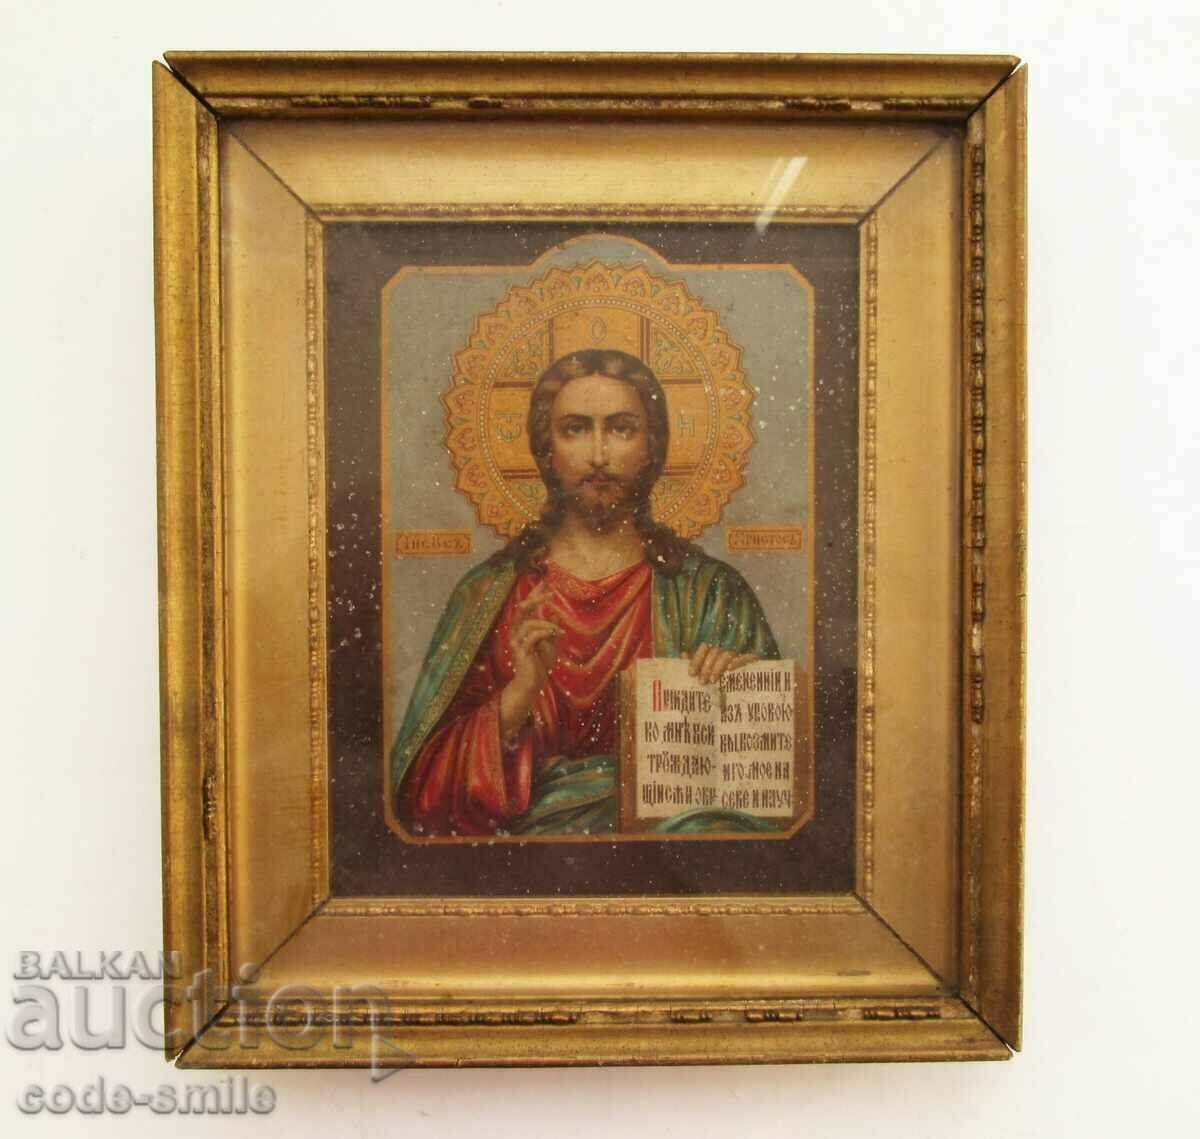 Old Tsarist Russian icon Jesus Christ lithography 19th century